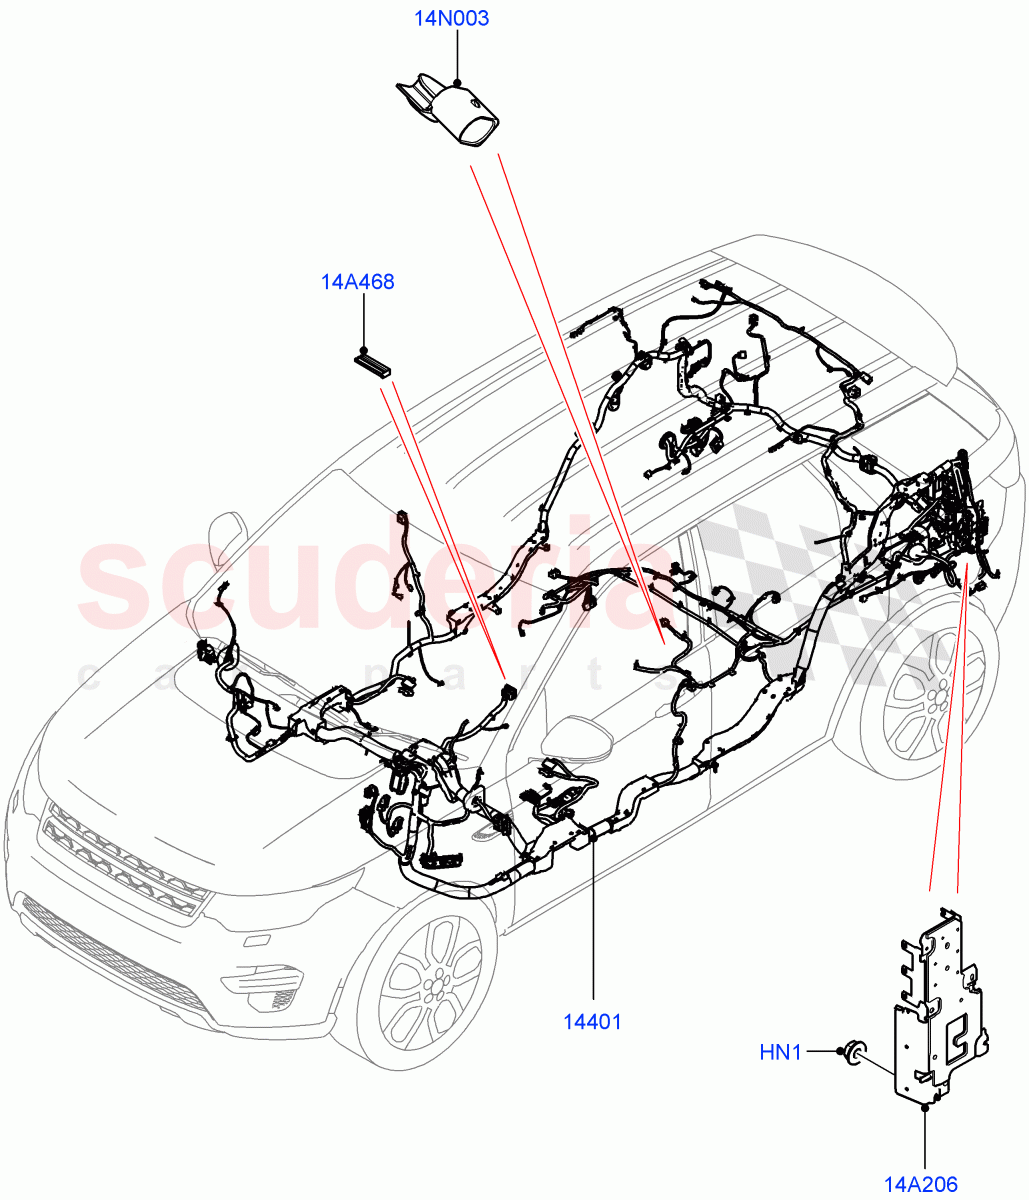 Electrical Wiring - Engine And Dash(Main Harness)(Halewood (UK))((V)TOKH999999) of Land Rover Land Rover Discovery Sport (2015+) [2.0 Turbo Diesel AJ21D4]